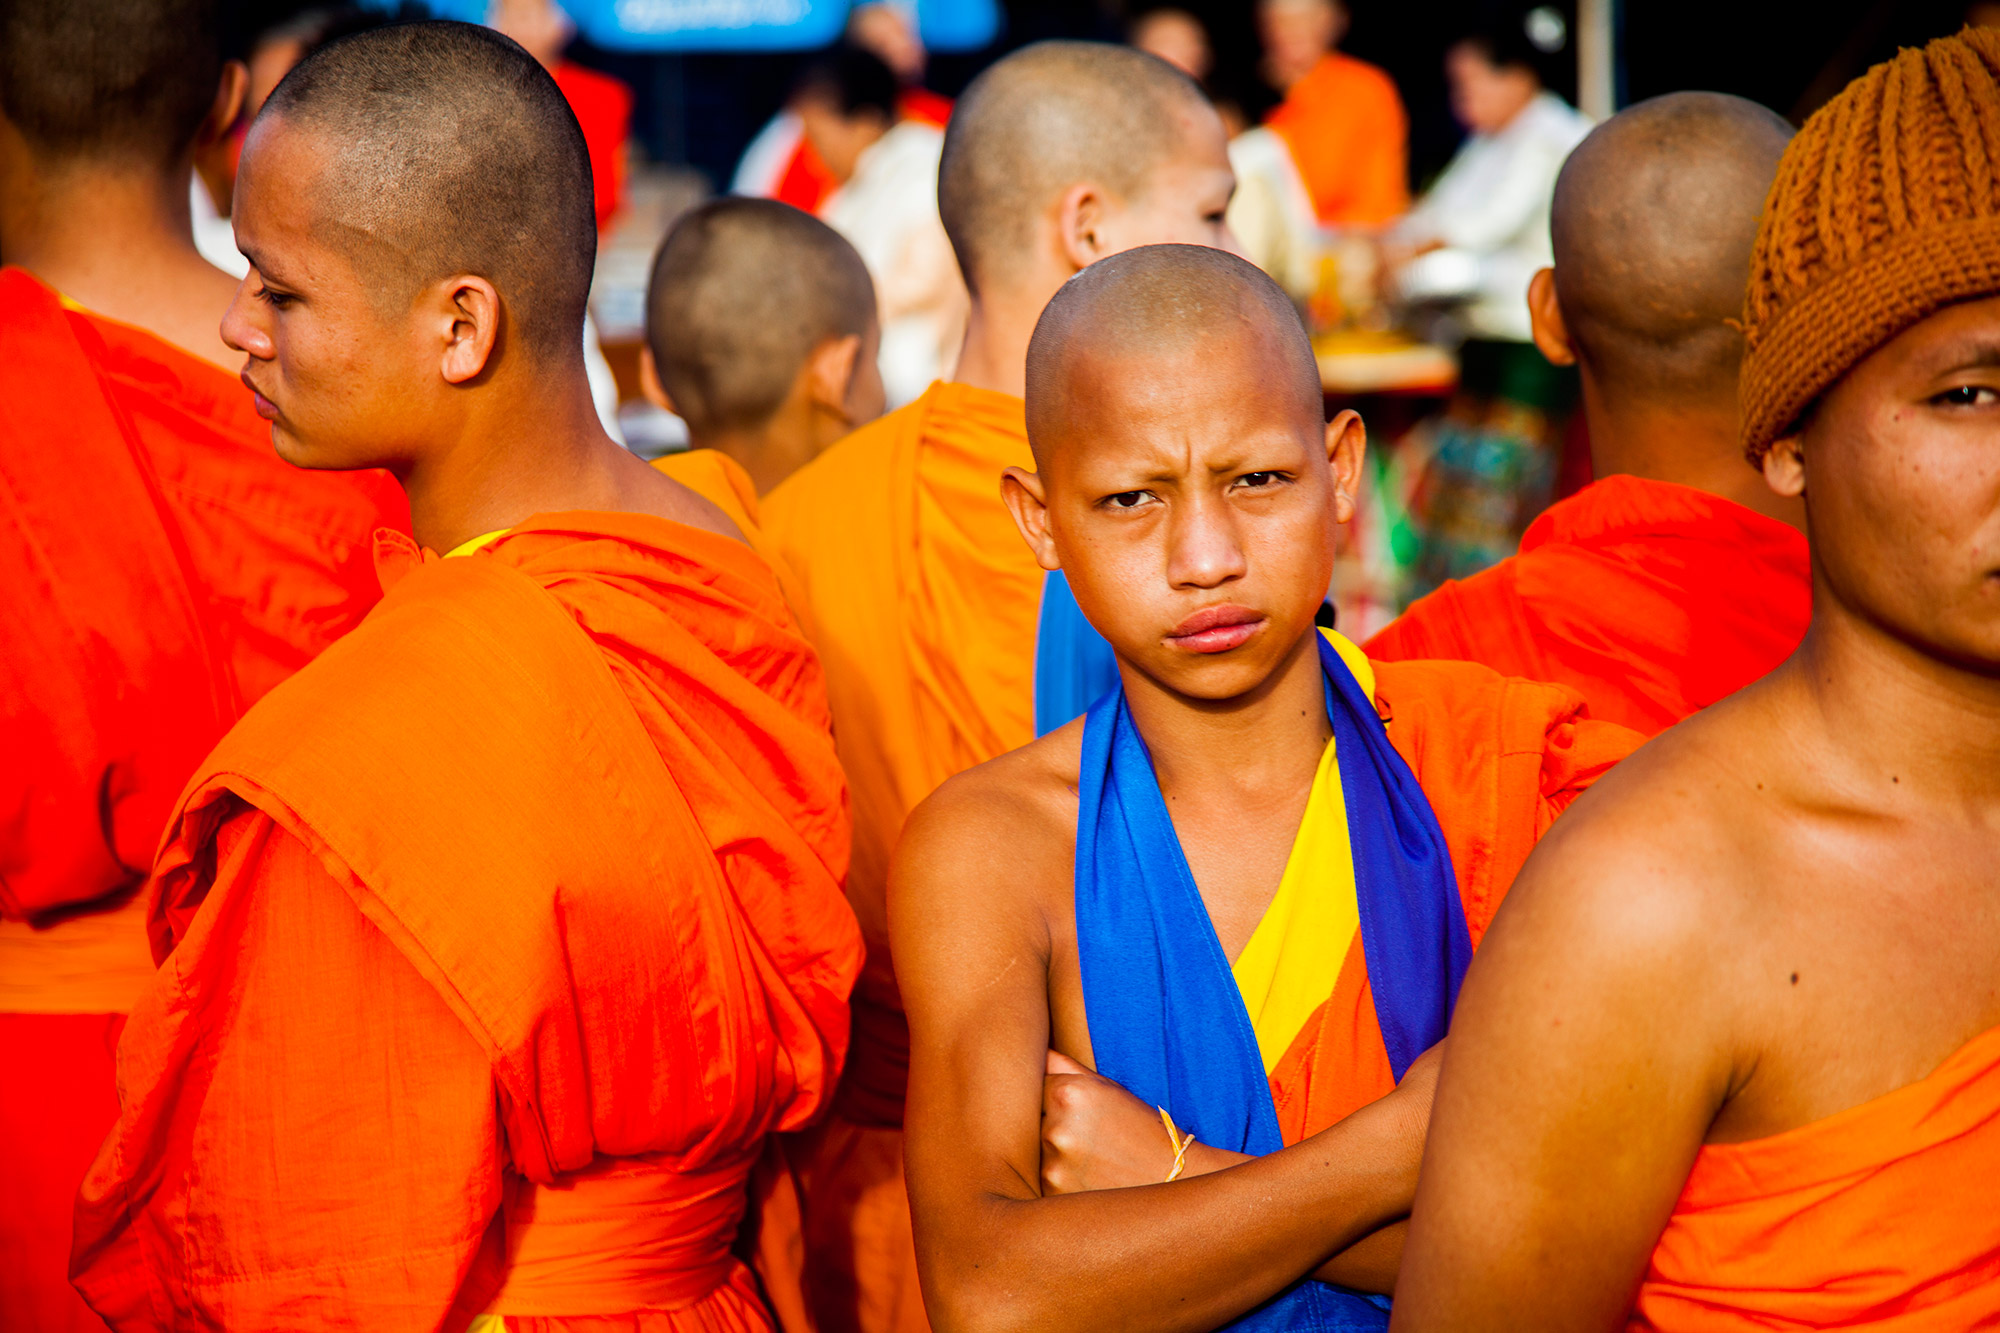 Monk at That Luang Festival